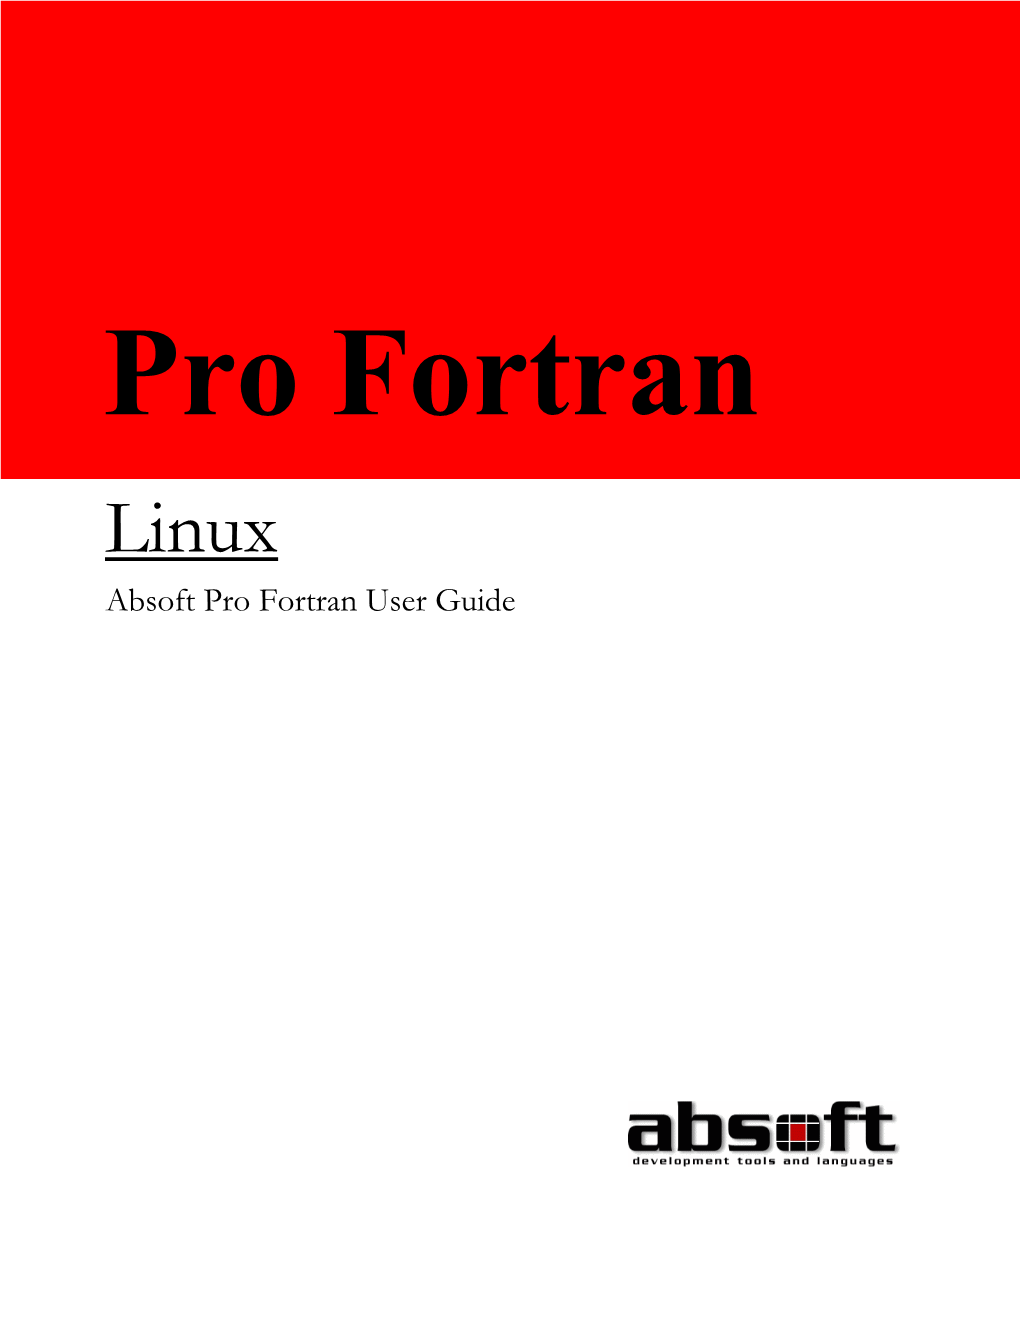 Linux Absoft Pro Fortran User Guide